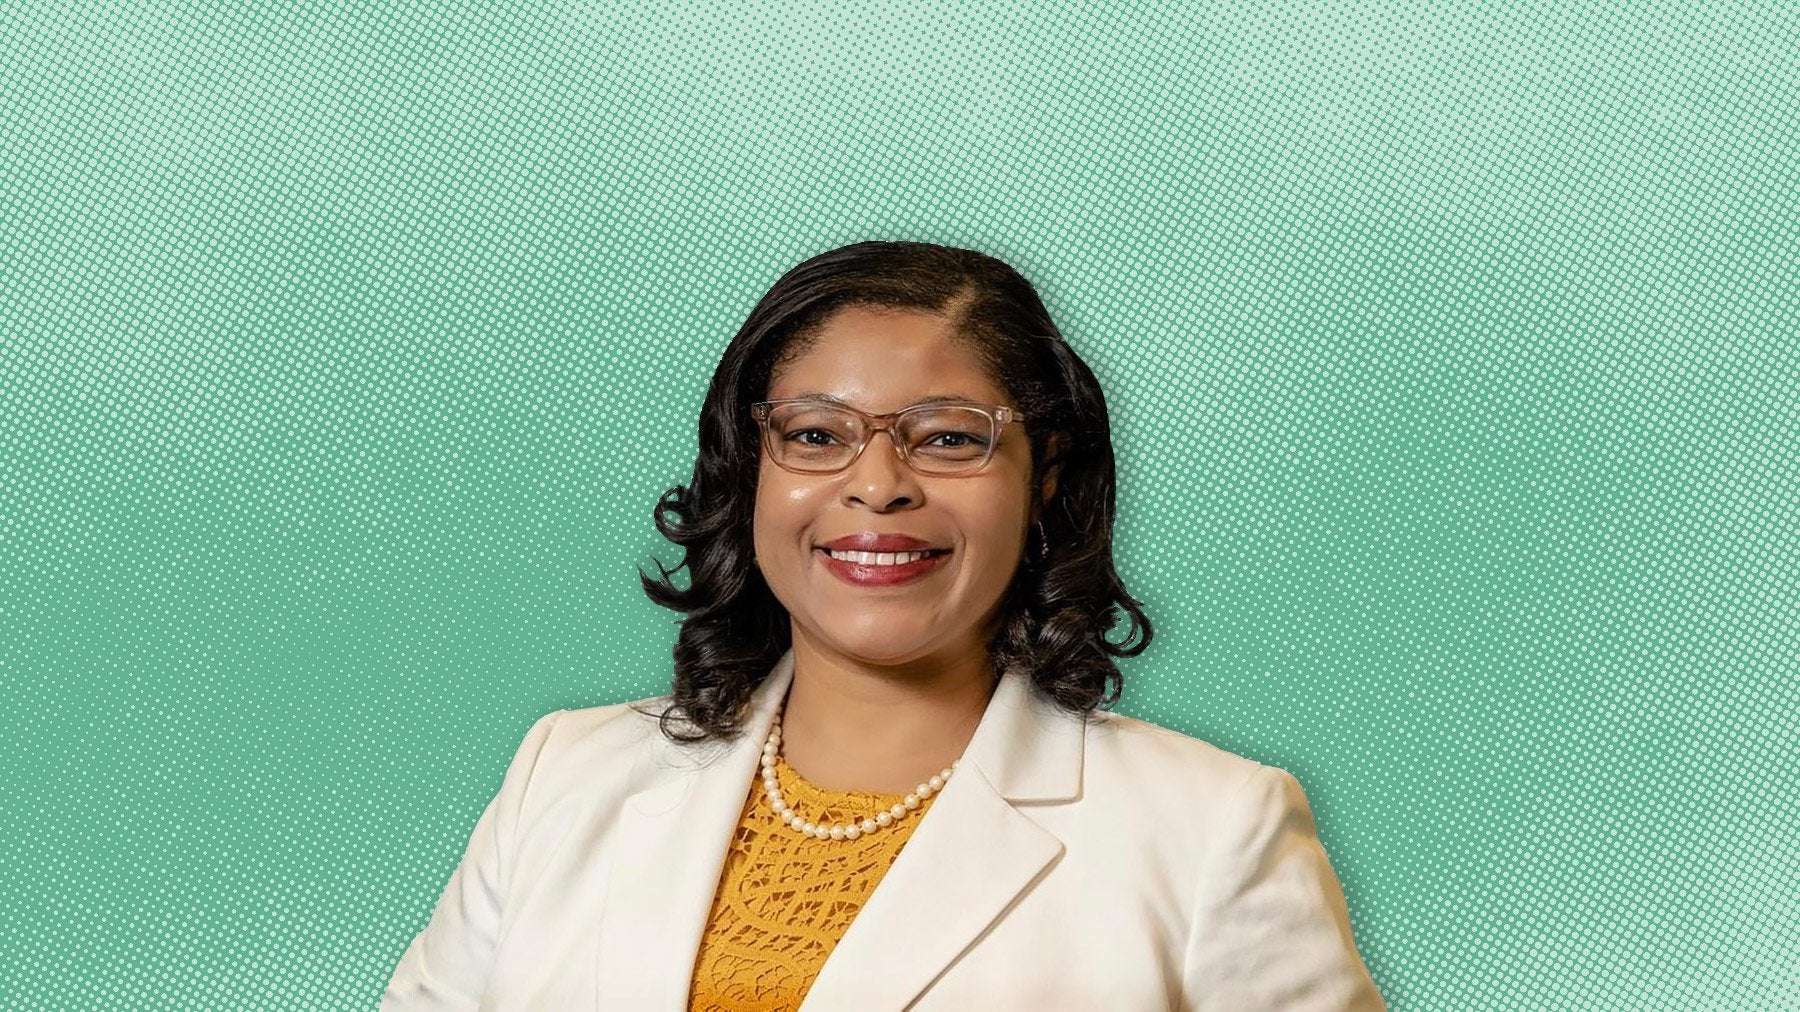 image for Ignoring the Voters: Alabama commission dissolves judicial seat won by Black woman